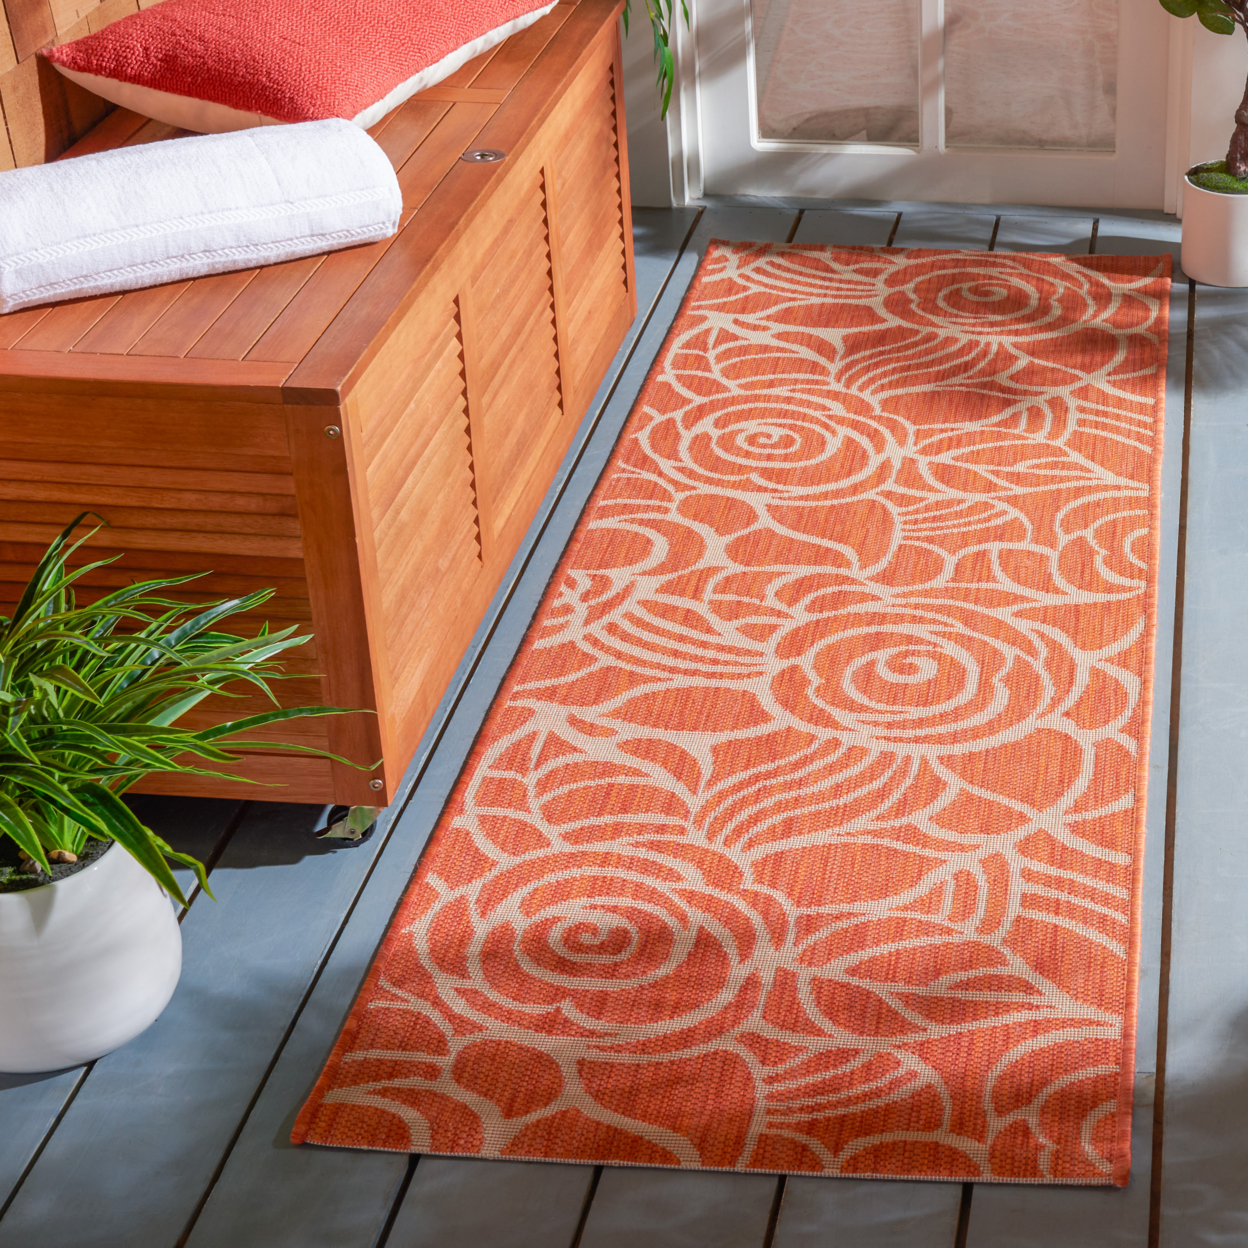 SAFAVIEH Outdoor CY5141A Courtyard Collection Rust / Sand Rug - 4' X 5' 7